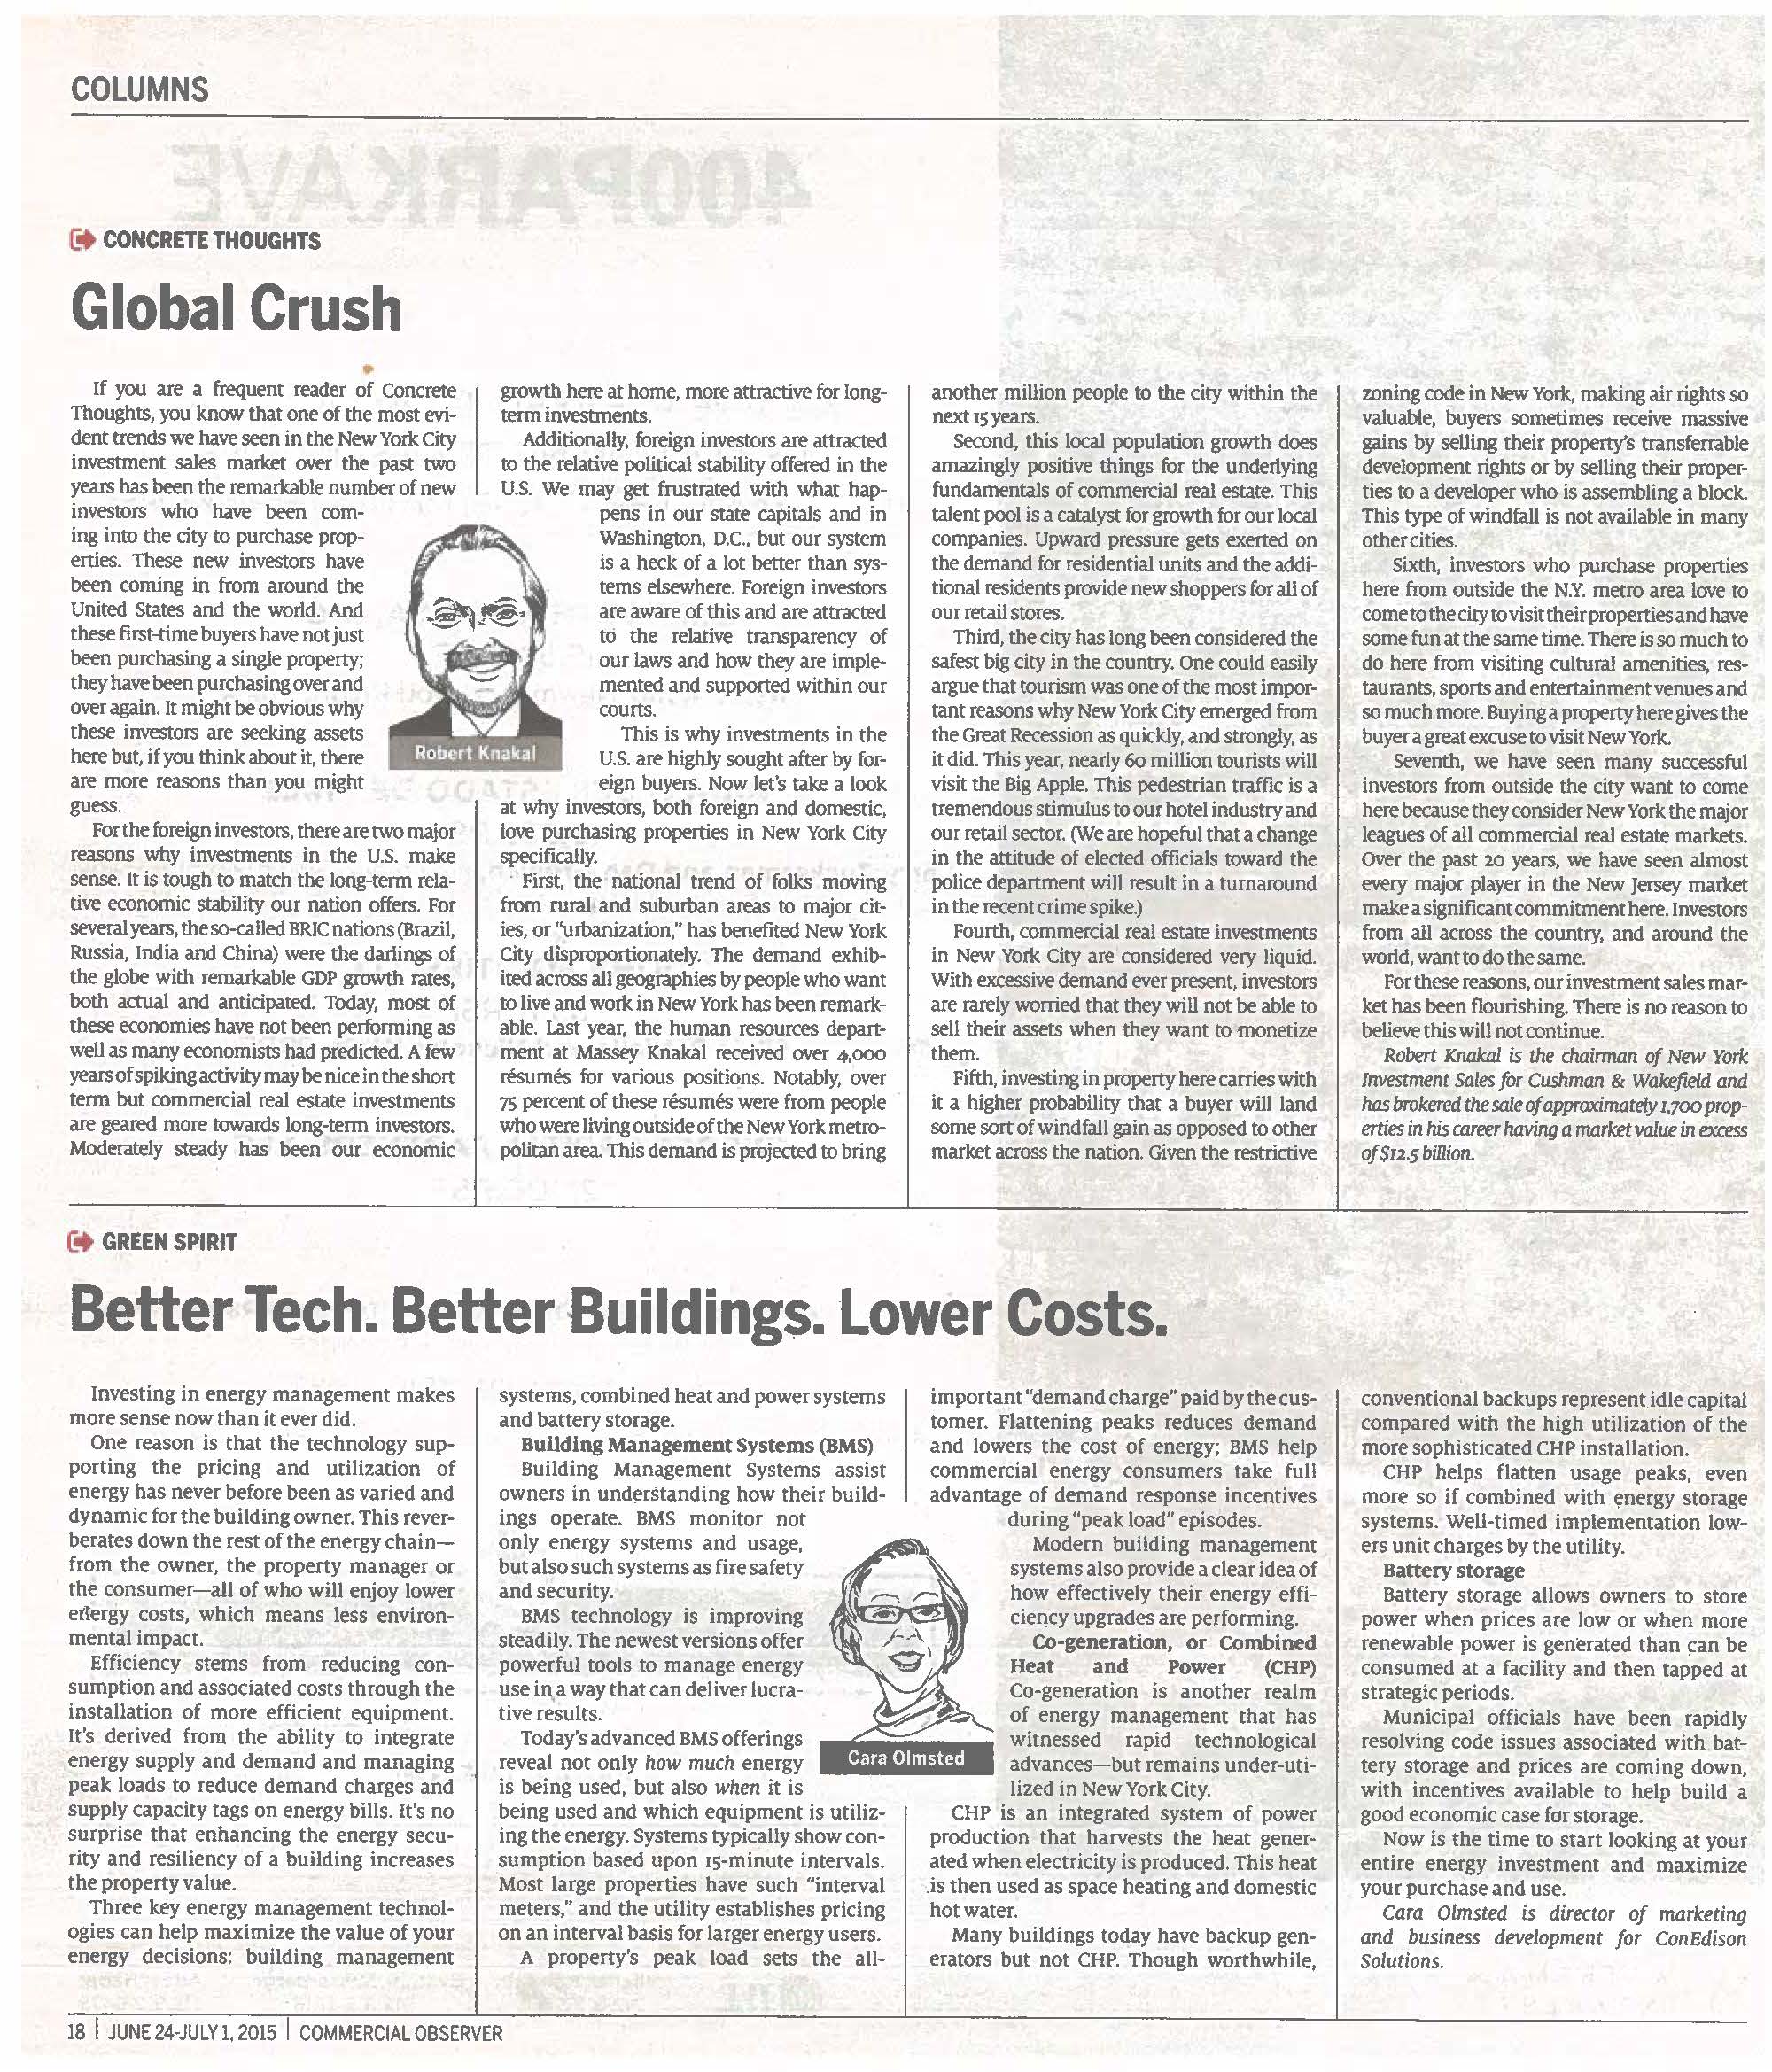 Concrete Thoughts - Global Crush - June 24 2015